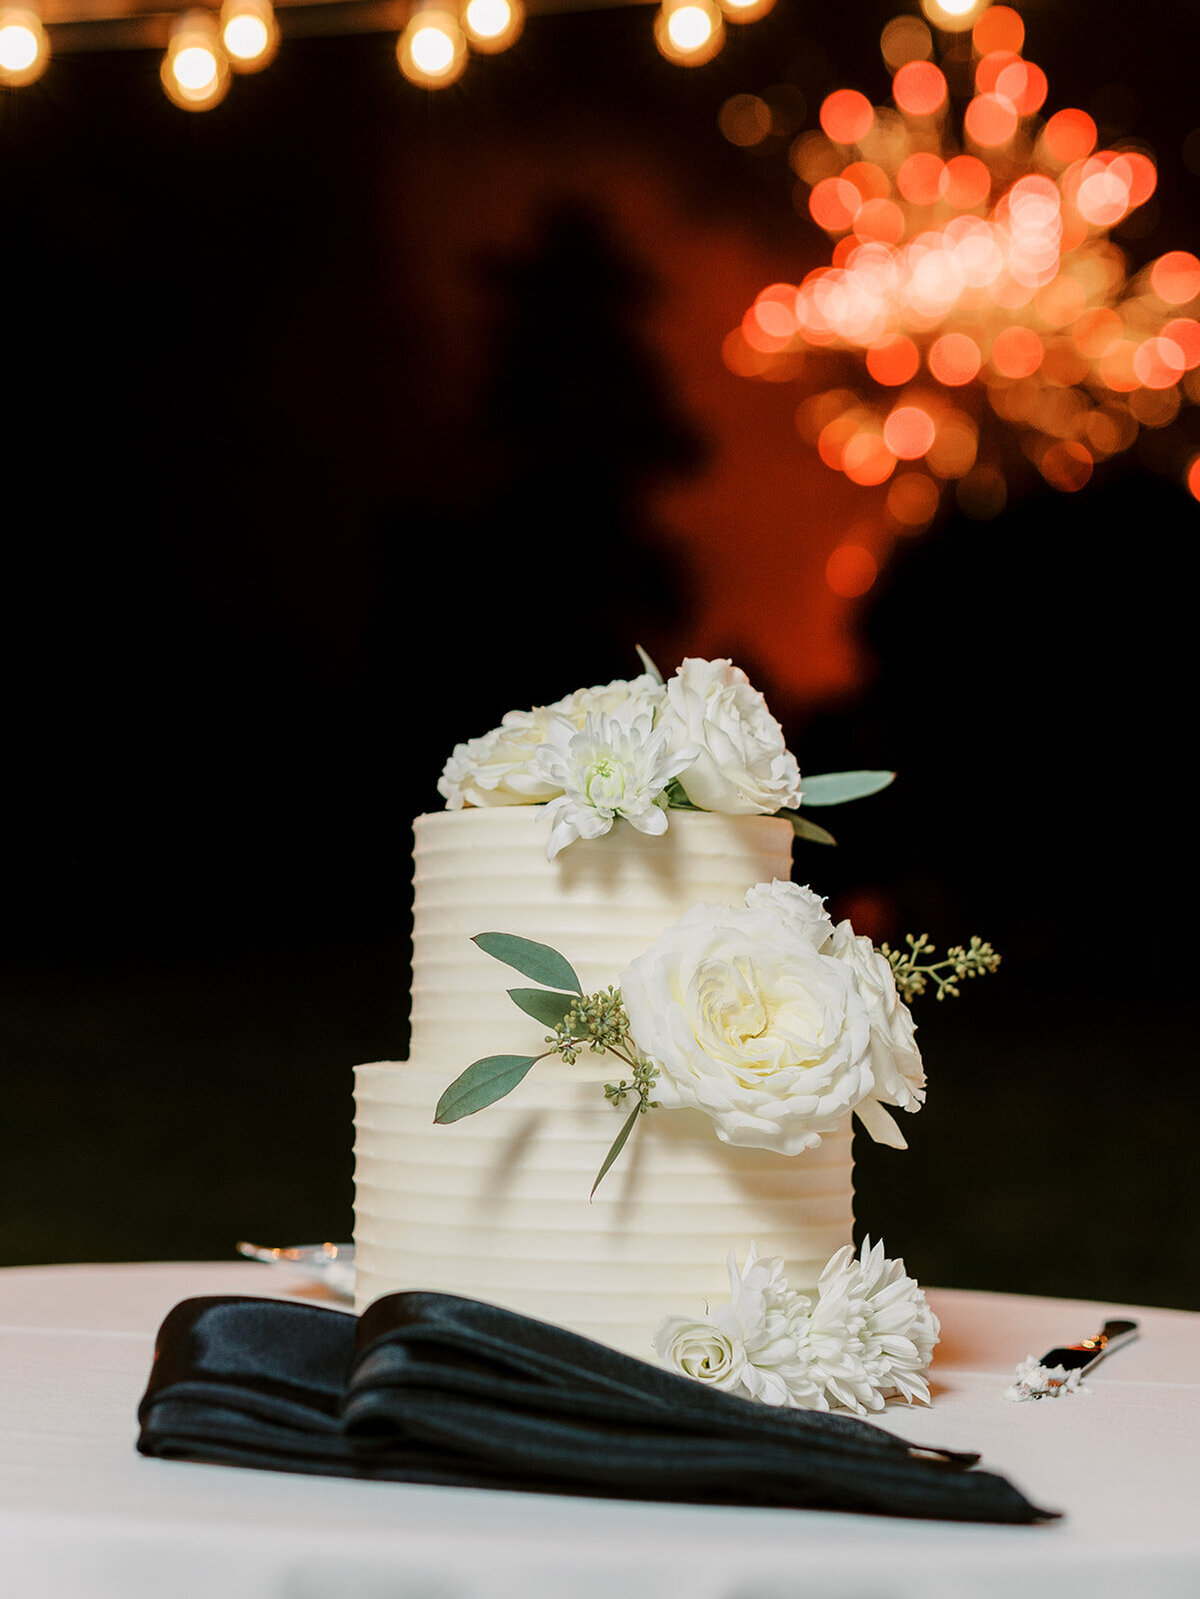 Cake shot with fireworks in the background